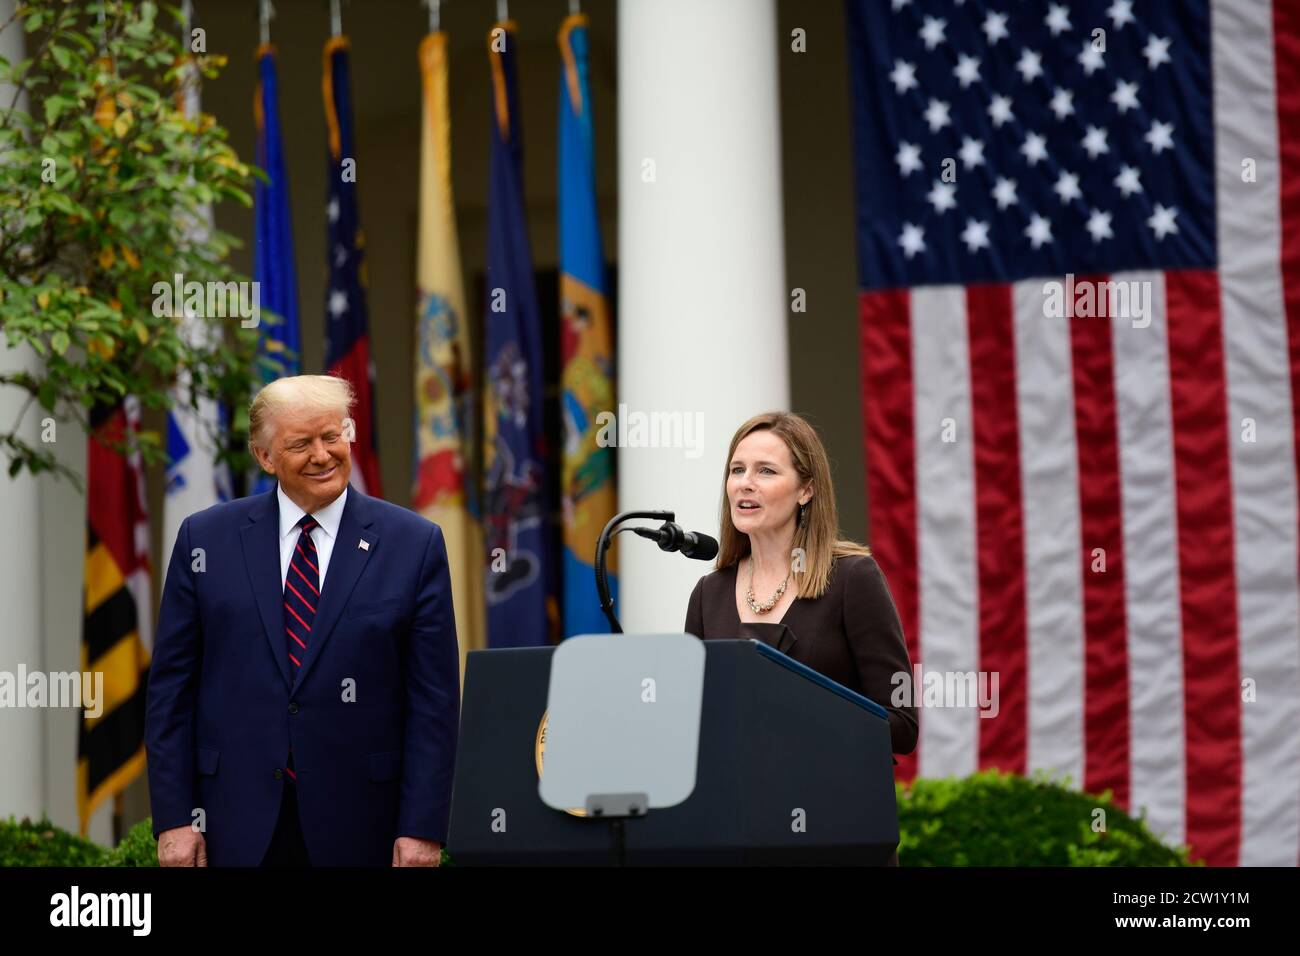 Washington, United States Of America. 26th Sep, 2020. President Donald Trump announces Amy Coney Barrett, 48, as his nominee for Associate Justice of the Supreme Court of the United States during a ceremony in the Rose Garden at The White House in Washington, DC., Saturday, September 26, 2020.Credit: Rod Lamkey/Consolidated News Photos | usage worldwide Credit: dpa/Alamy Live News Stock Photo